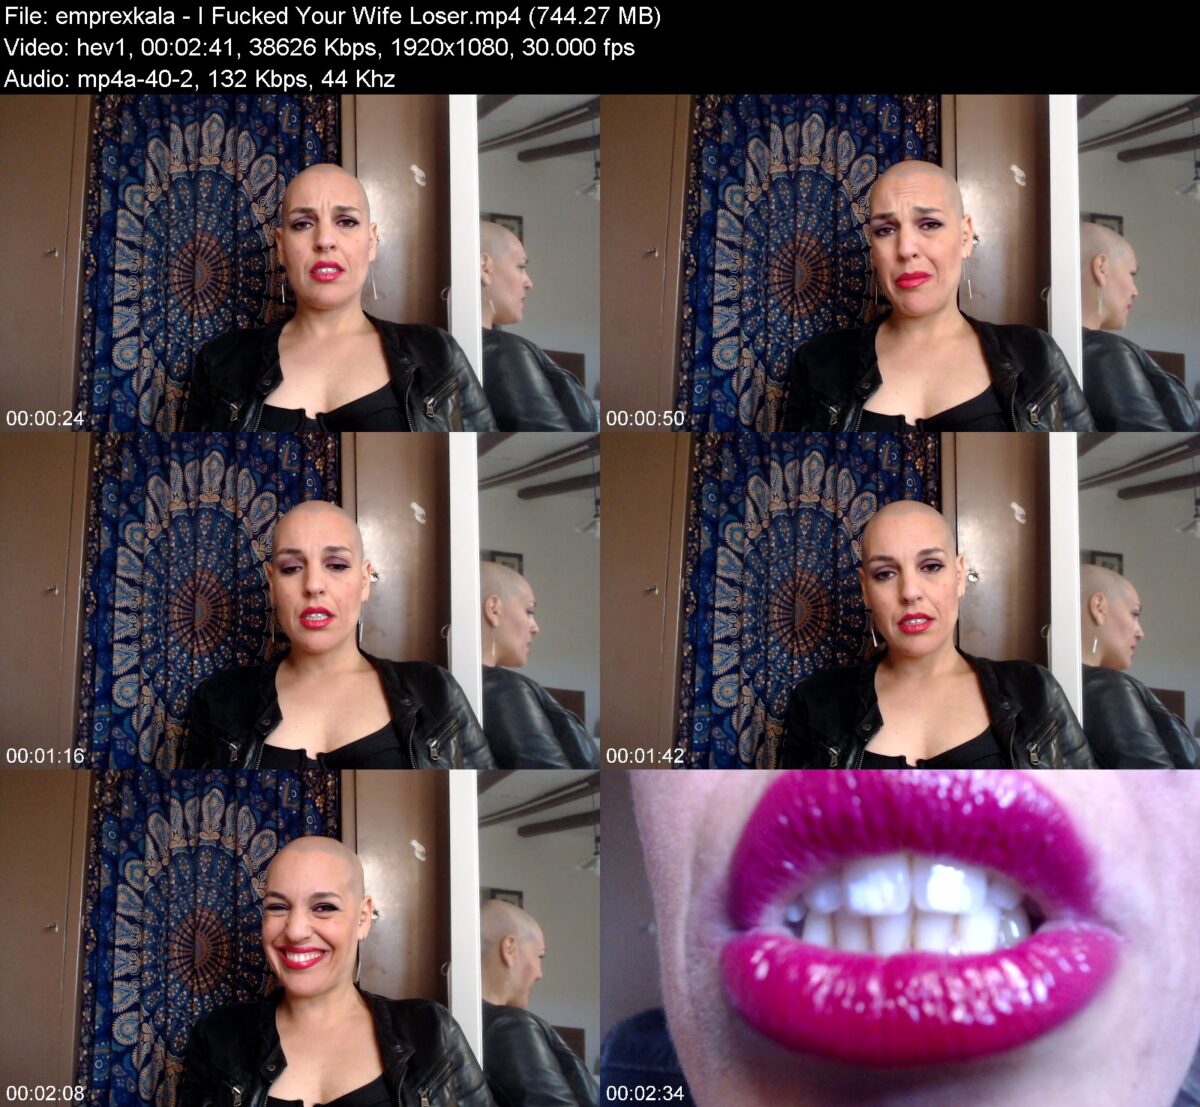 emprexkala in I Fucked Your Wife Loser